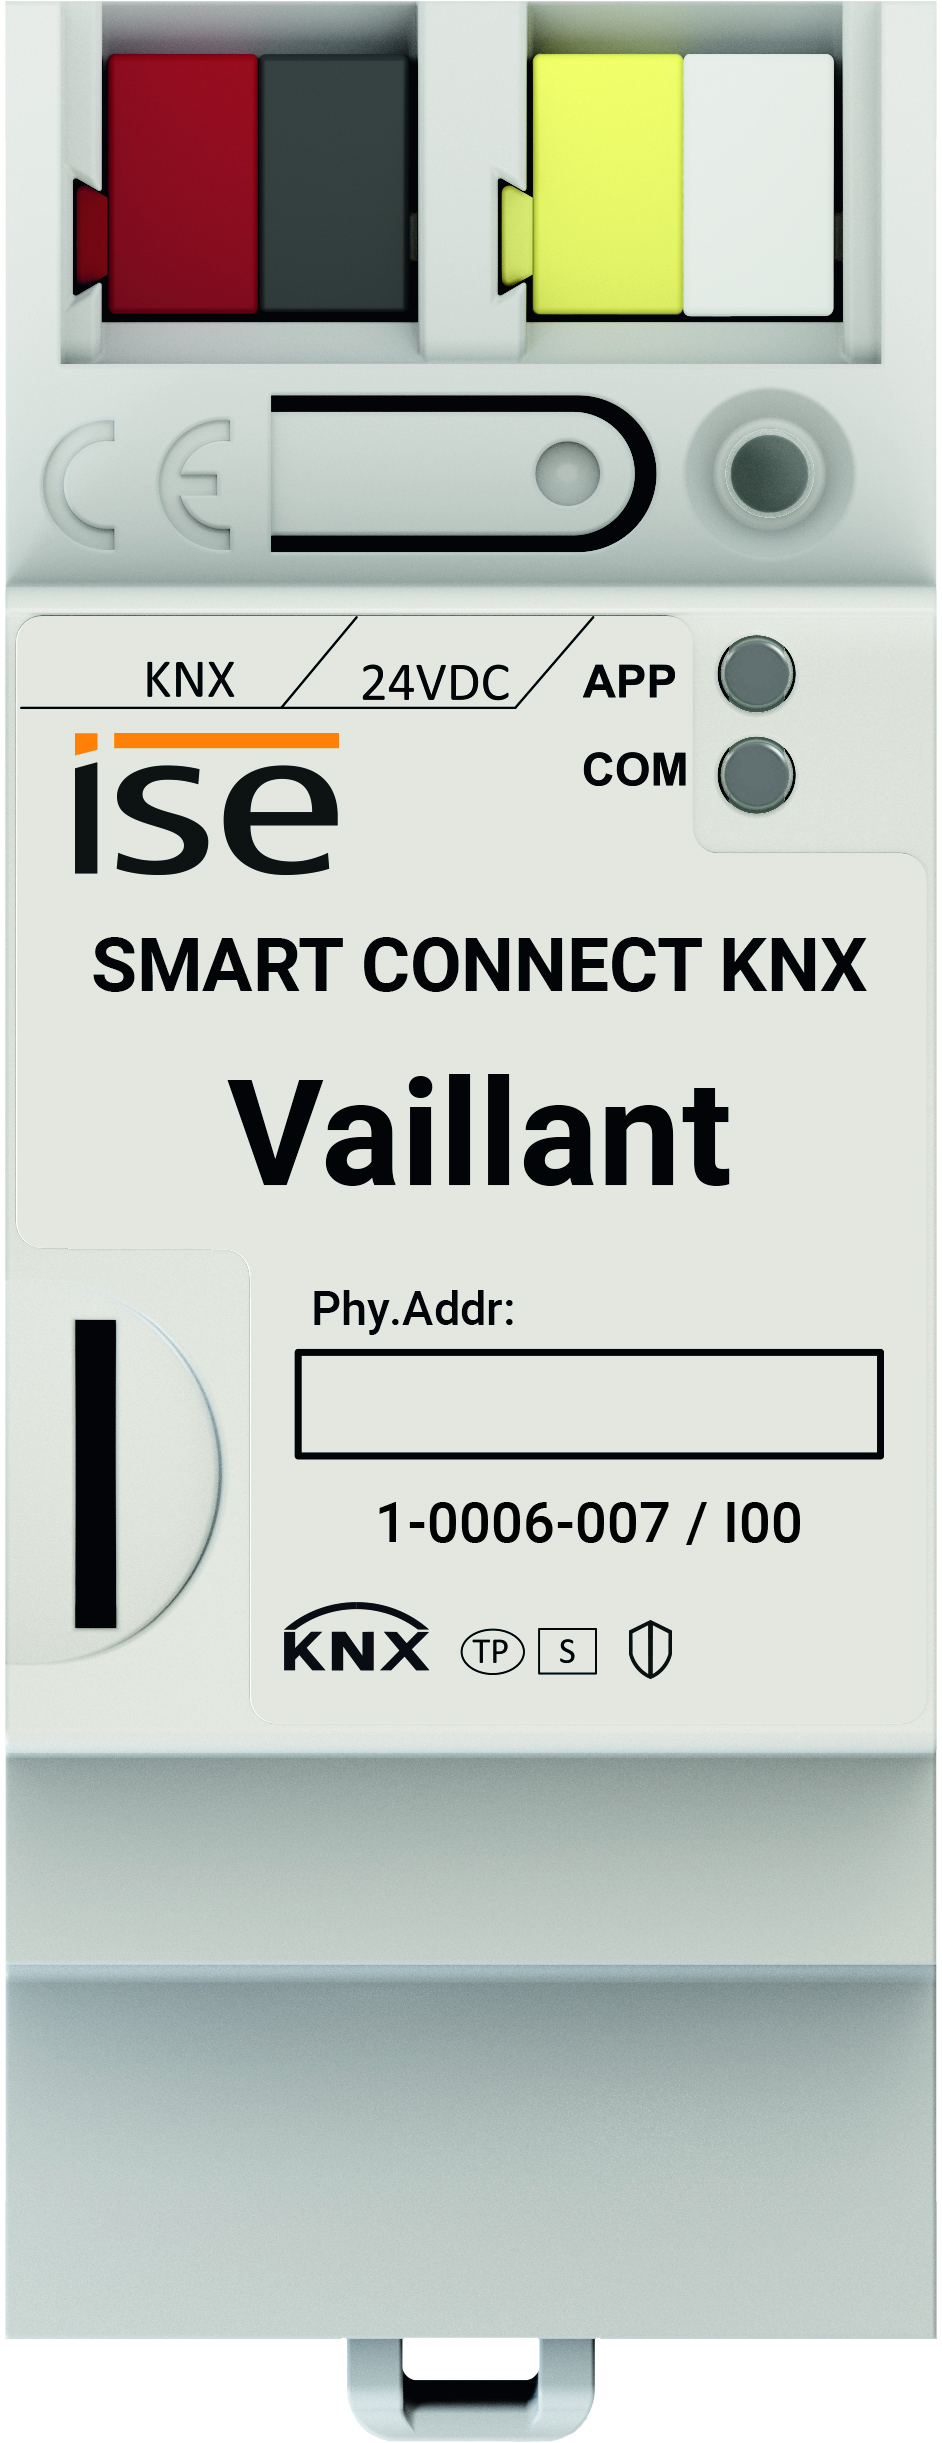 KNX-SMART CONNECT Vaillant